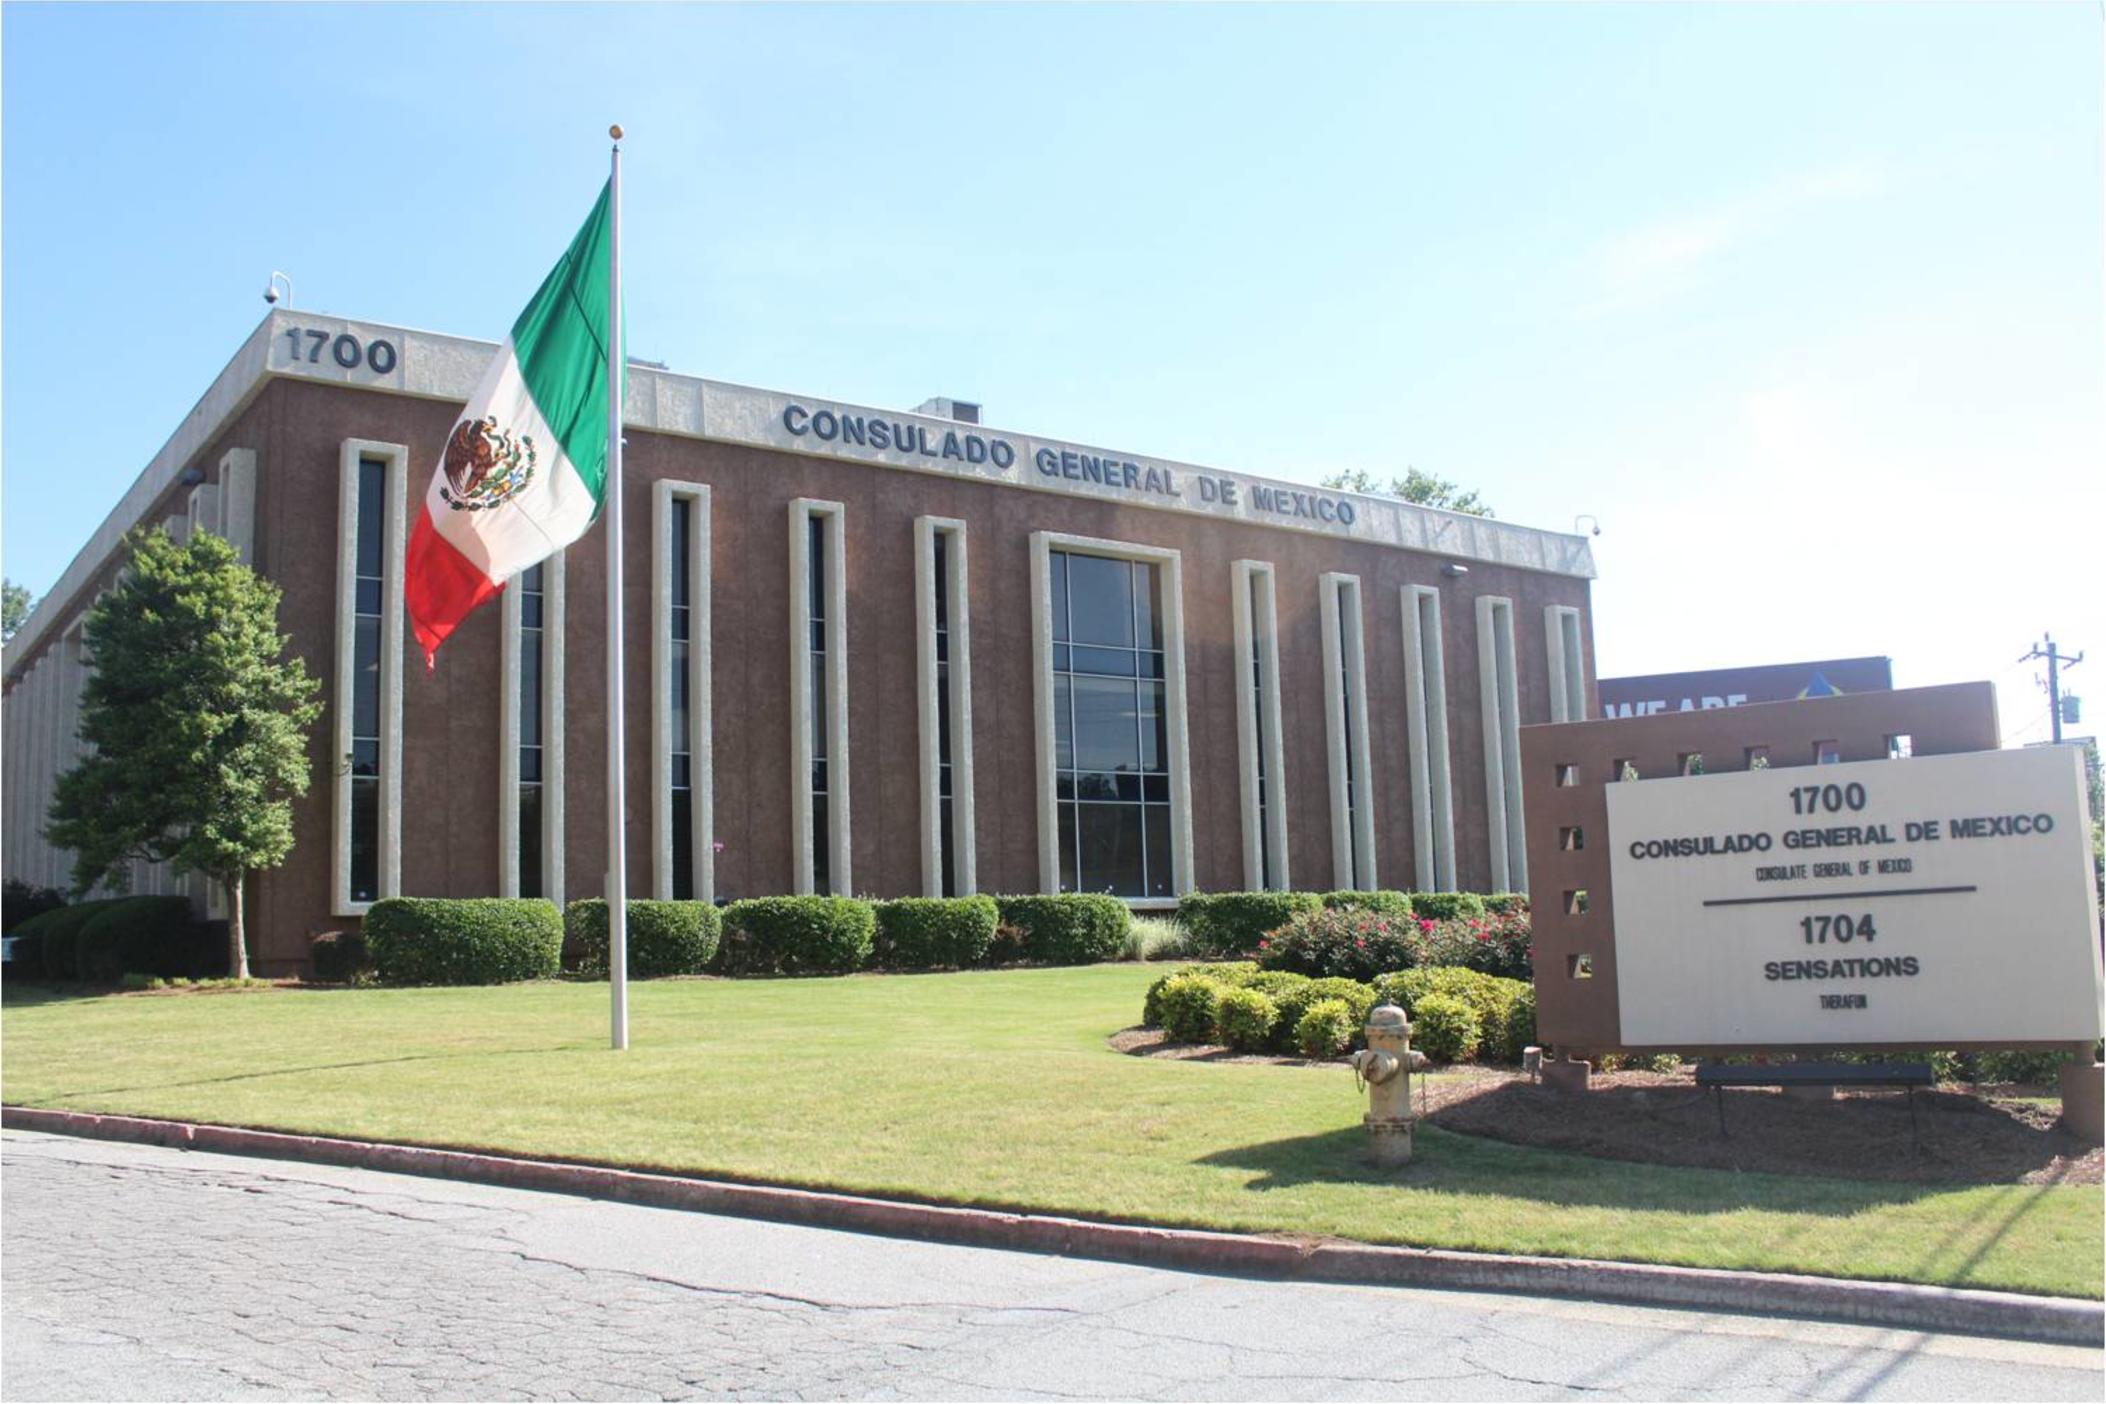 Emory University and the Consulate General of Mexico in Atlanta are partnering to expand COVID-19 testing for the latinx community.